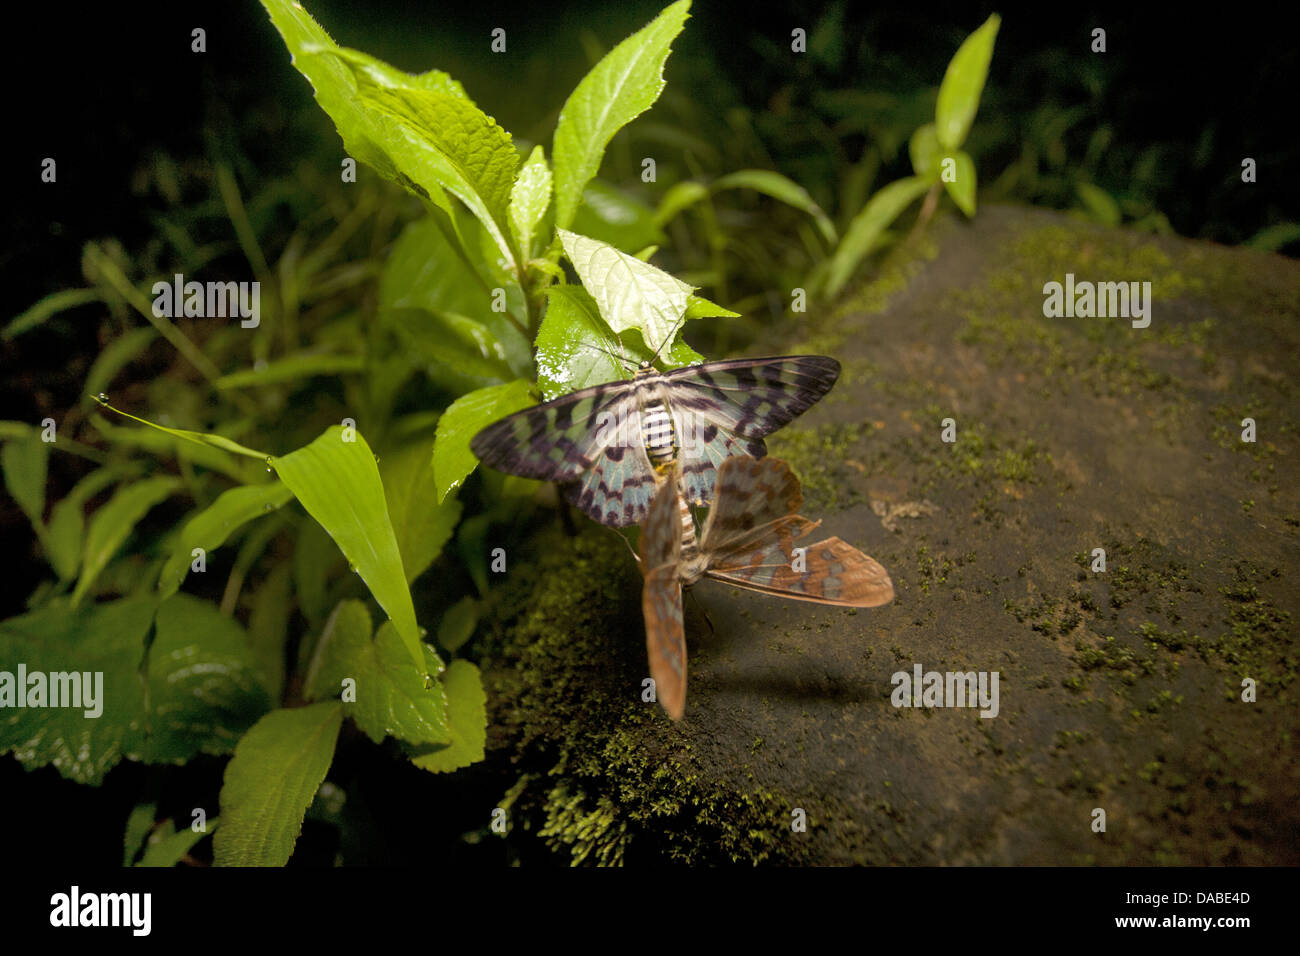 A rare image of Day moths mating at night in Mhadei wildlife sanctuary. Goa India Stock Photo